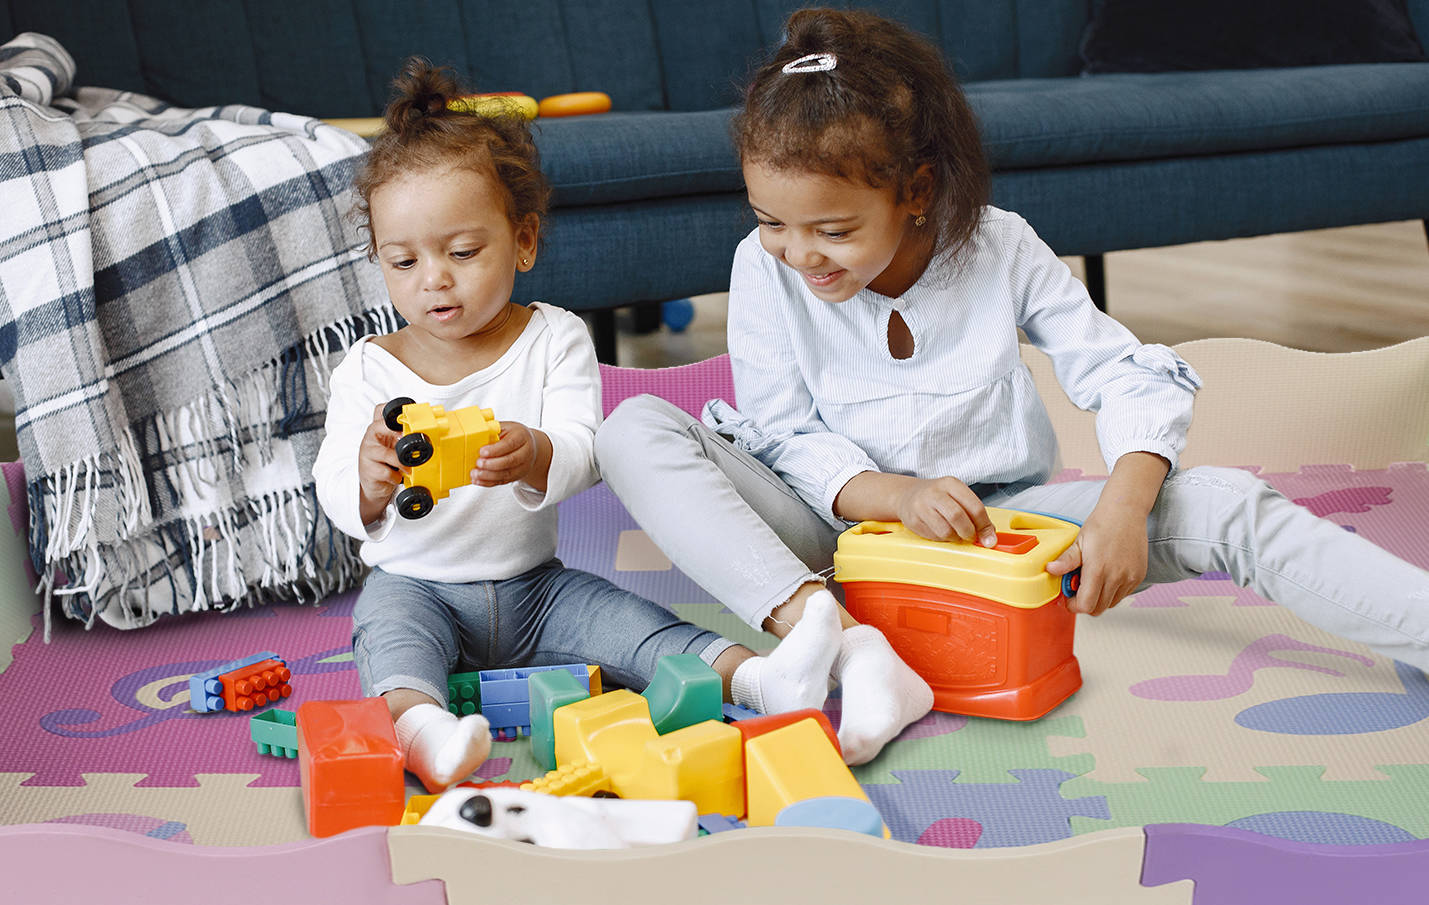 Cute little girls playing with toys on the floor near the couch